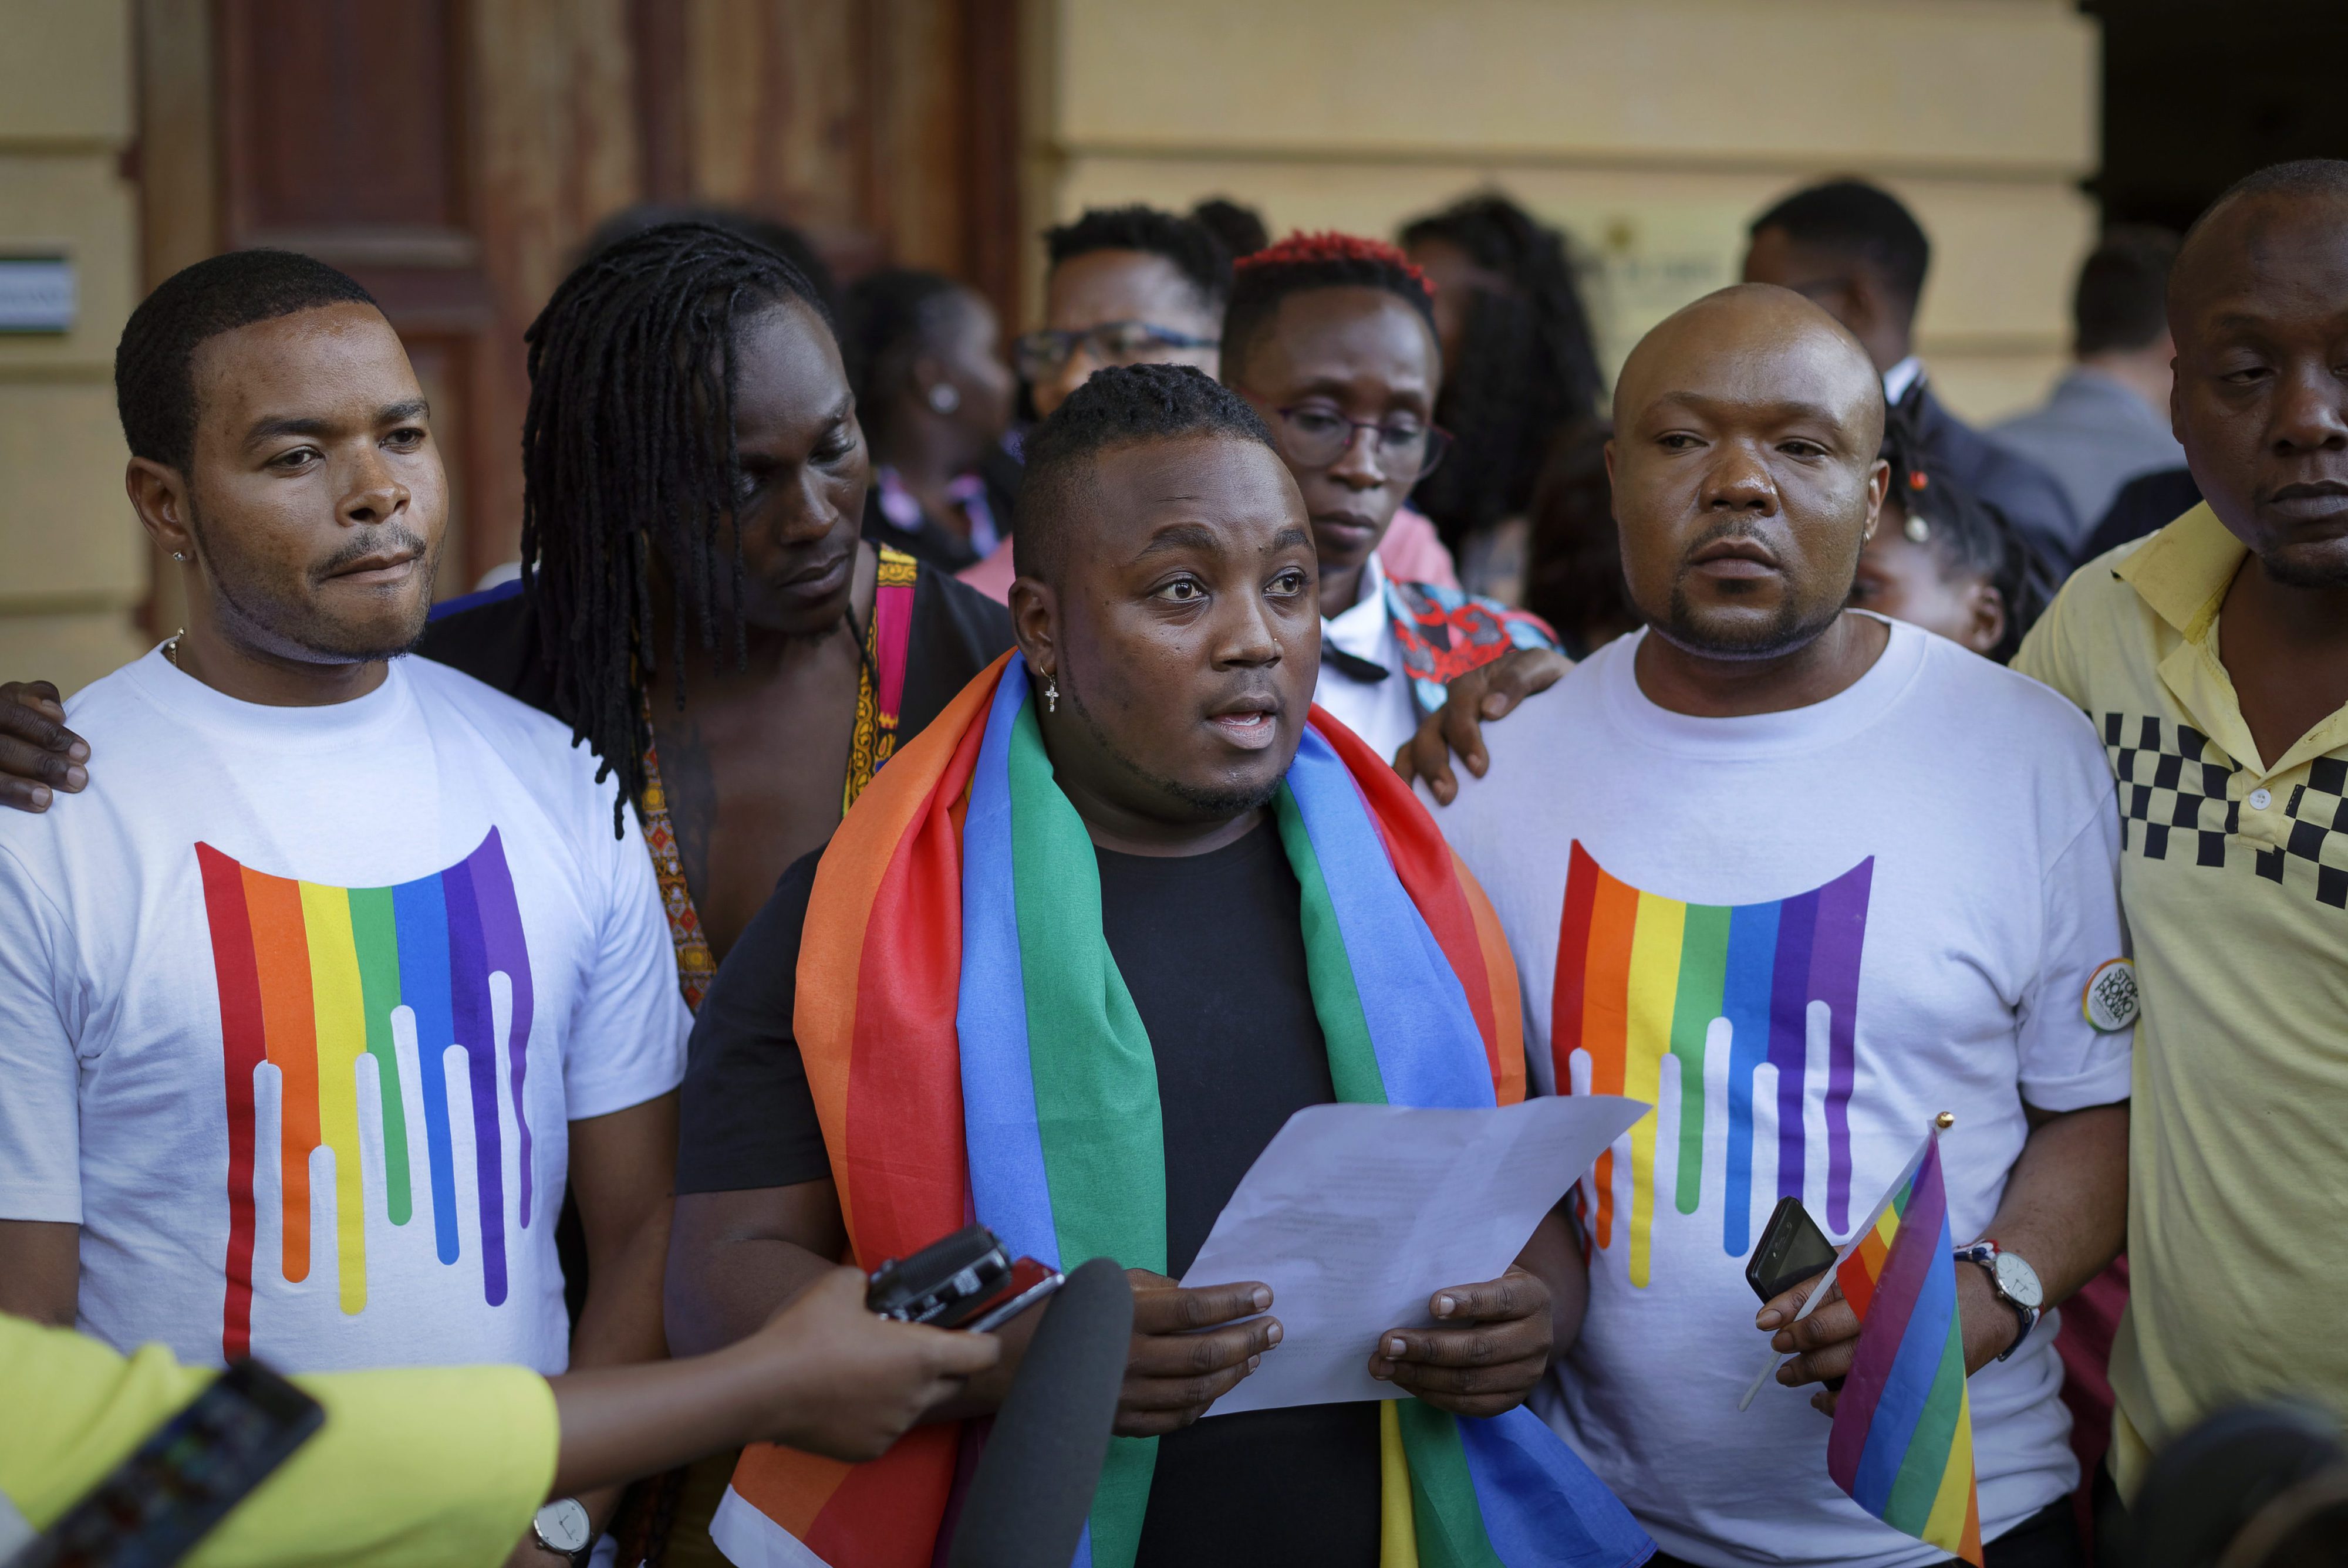 Representatives of the LGBT community in Nairobi read a statement after Kenya's High Court upheld sections of the penal code that criminalize same-sex relations.